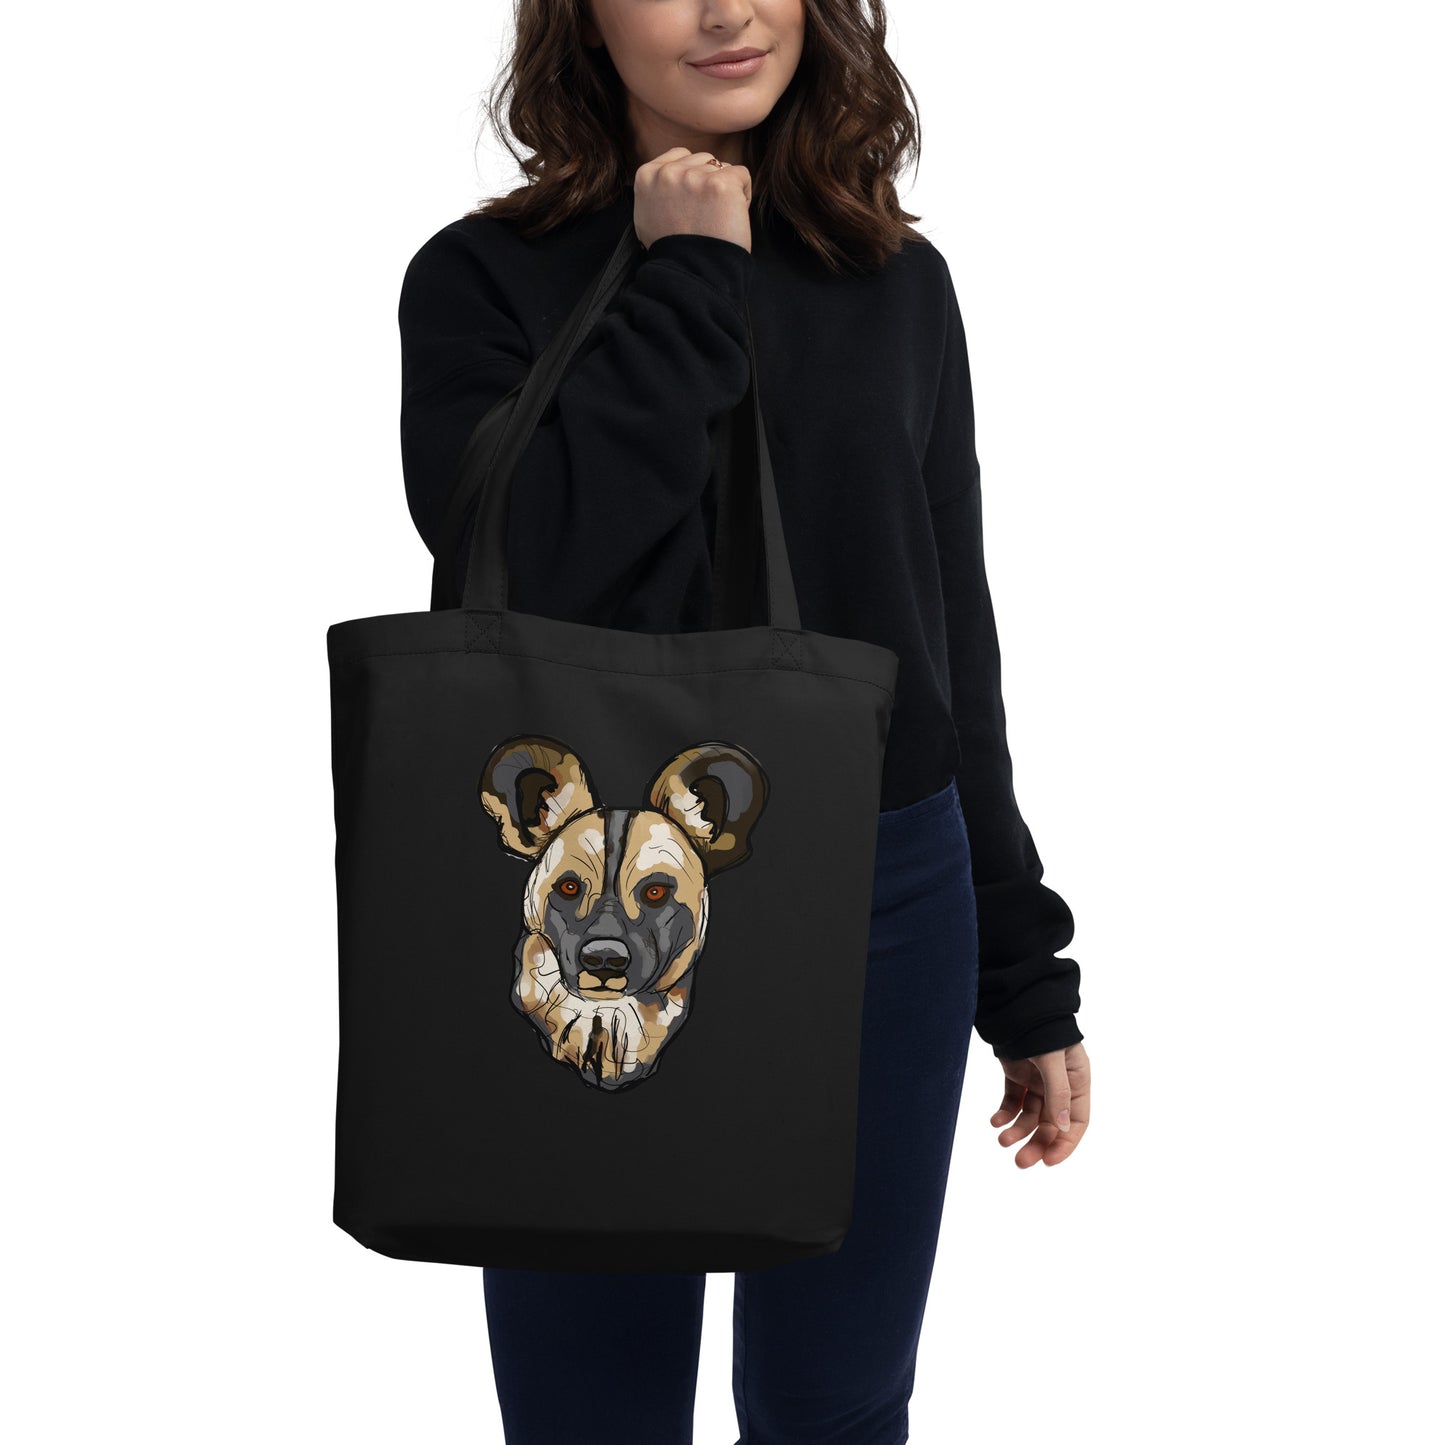 African Wild Dog Eco Tote Bag